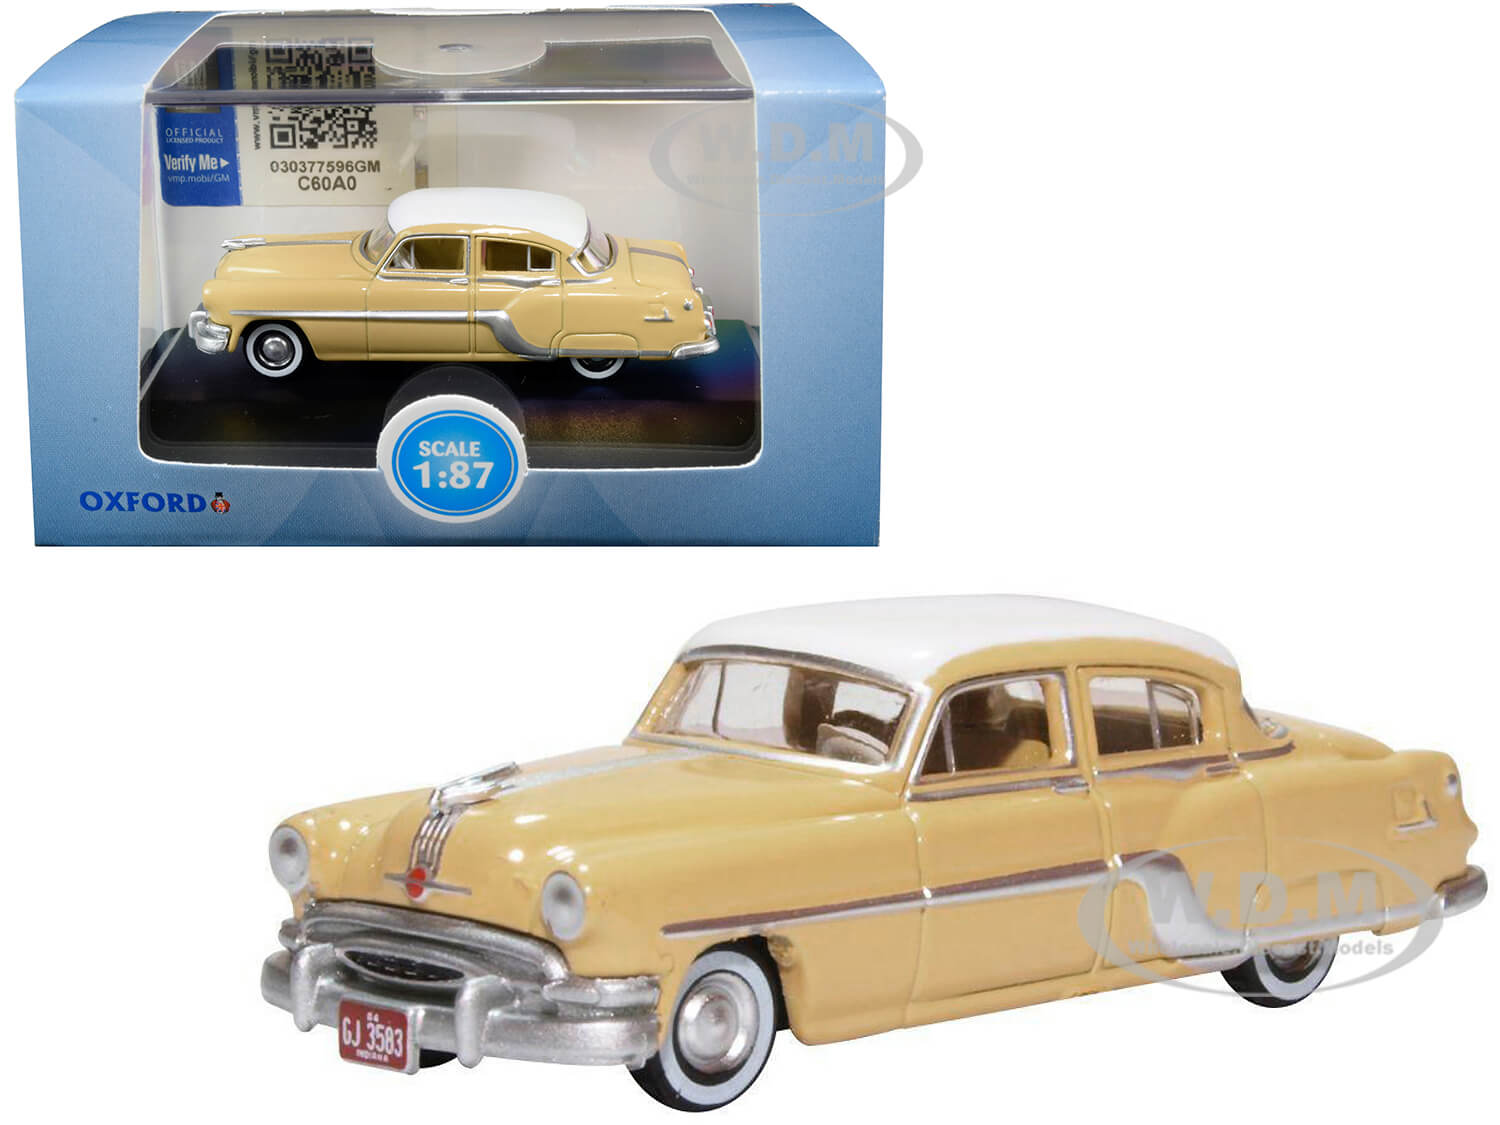 1954 Pontiac Chieftain 4 Door Maize Yellow with Winter White Top 1/87 (HO) Scale Diecast Model Car by Oxford Diecast